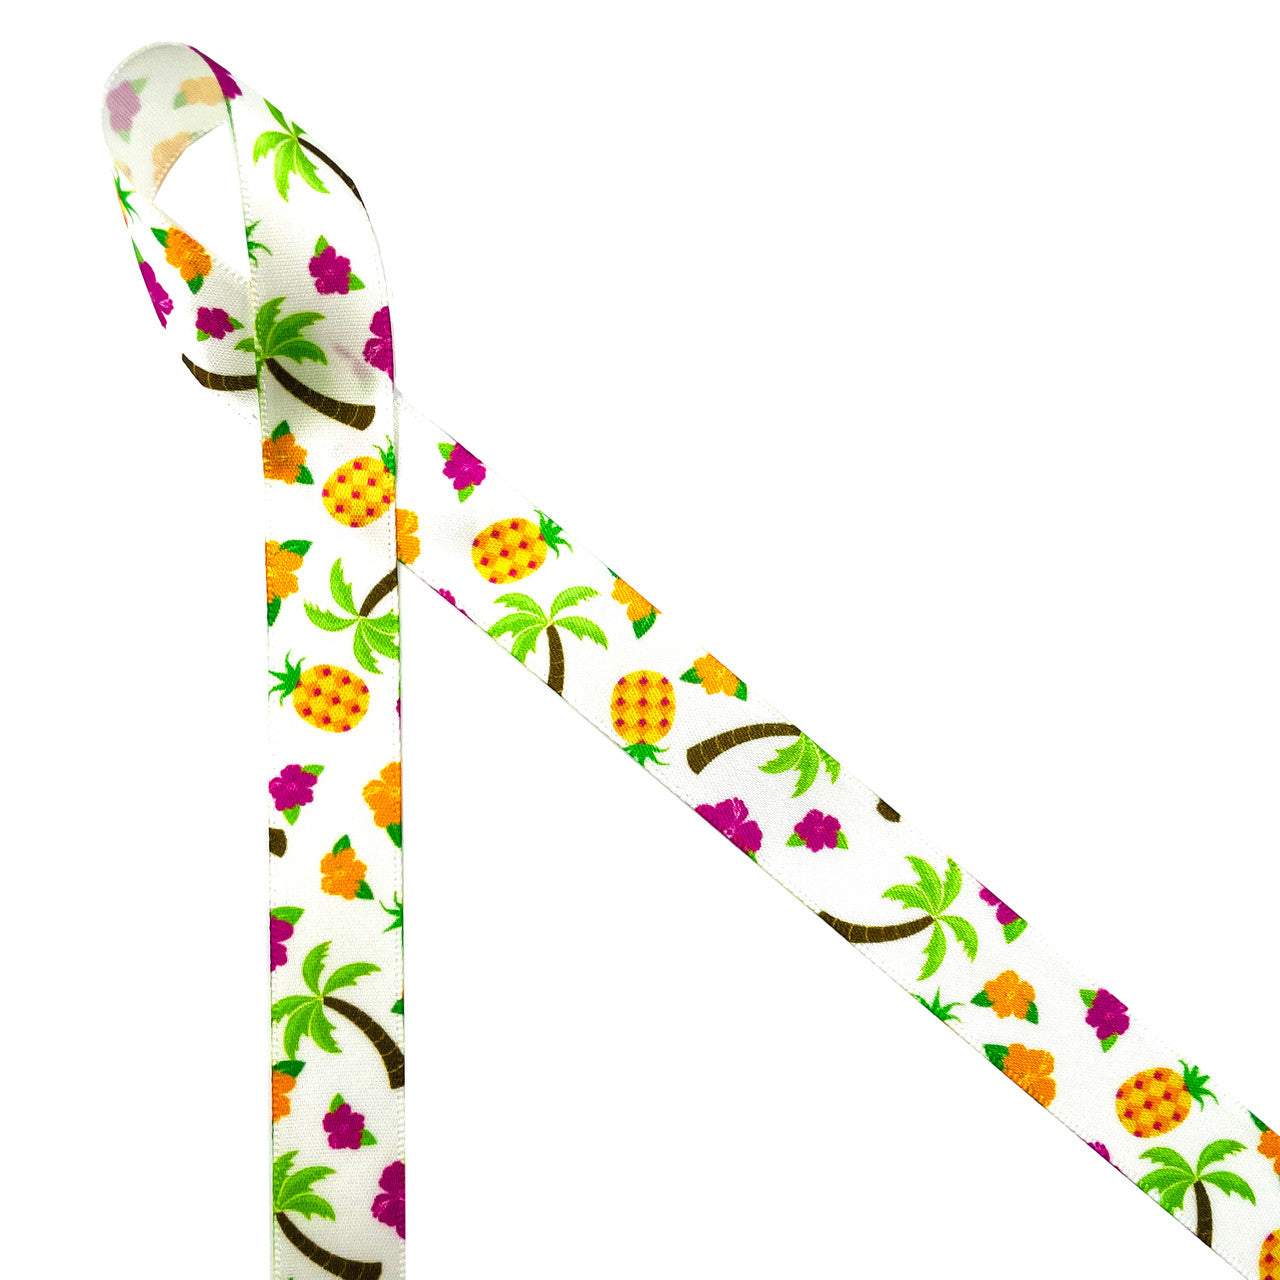 Hawaiian tropical ribbon features pineapples, palm trees, hibiscus blooms in pink and orange printed on 5/8" white single face satin. This is the ideal ribbon for luaus, party favors, tropical themed parties, gift wrap, party decor, cookies and cake pops. Use this ribbon for crafts, hair bows, sewing and quilting projects too! All our ribbon is designed and printed in the USA